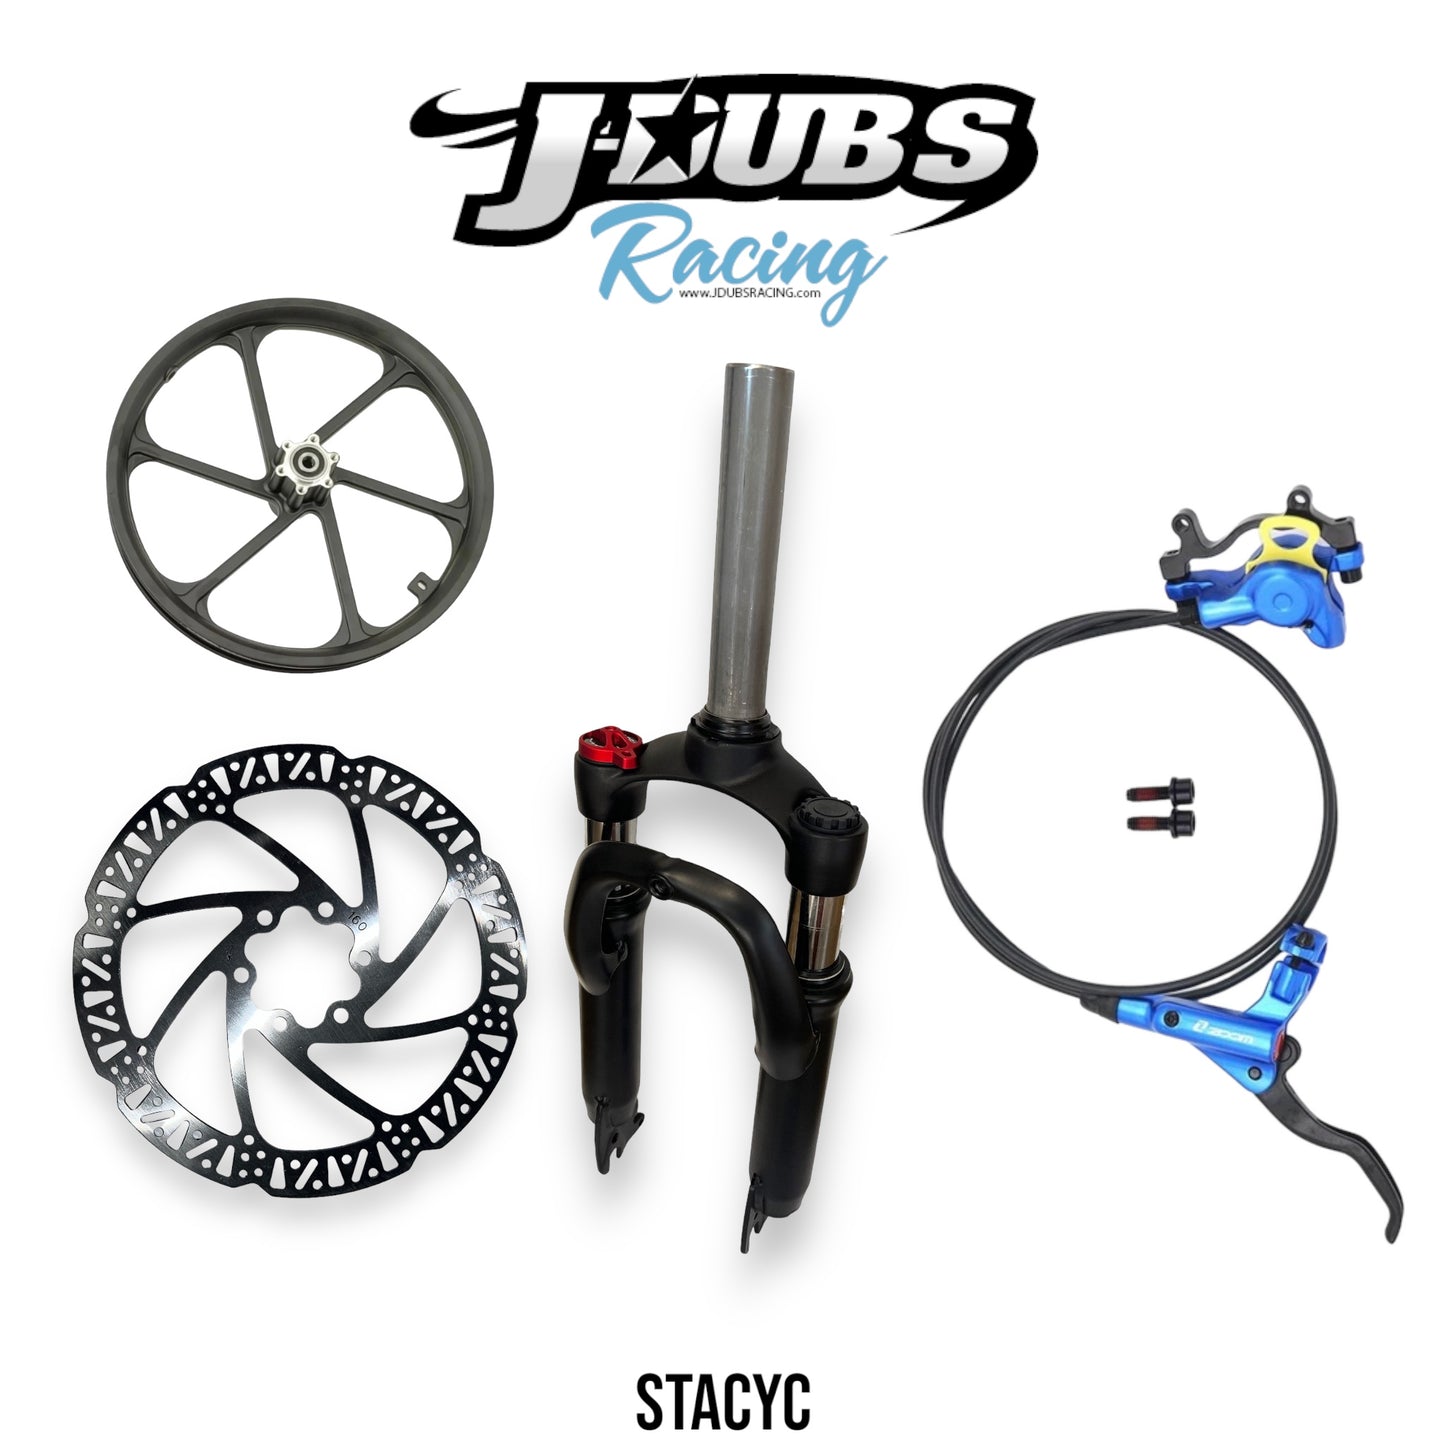 [Full Hydraulic] Stacyc - Build Your Own Suspension Forks and Front Brake Kit